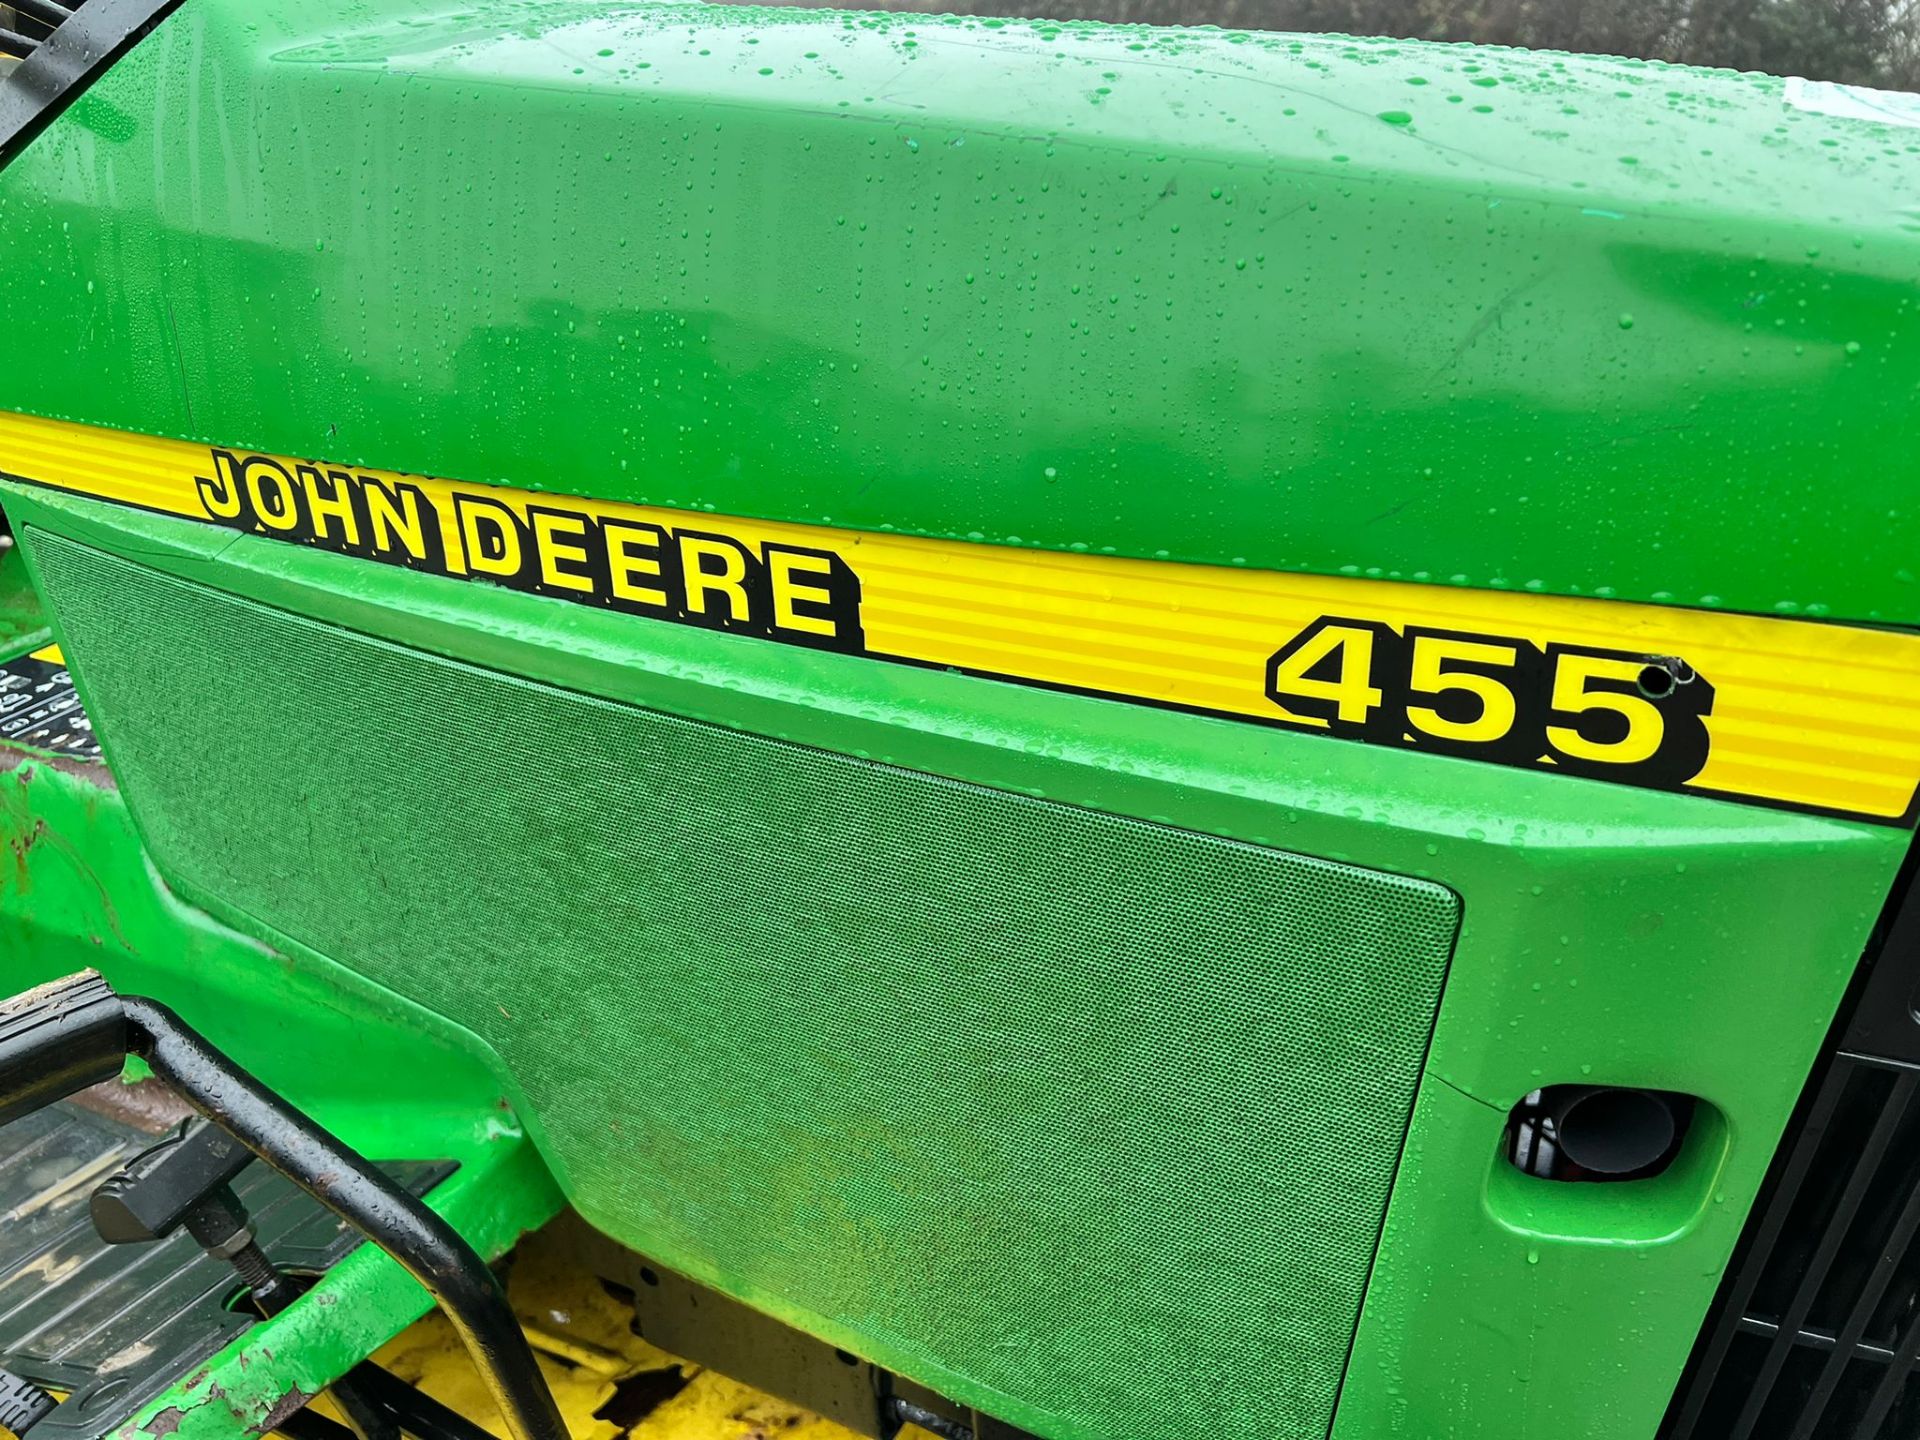 JOHN DEERE 455 22hp DIESEL RIDE ON MOWER WITH CLAMSHELL COLLECTOR, RUNS DRIVES AND CUTS *PLUS VAT* - Image 9 of 11